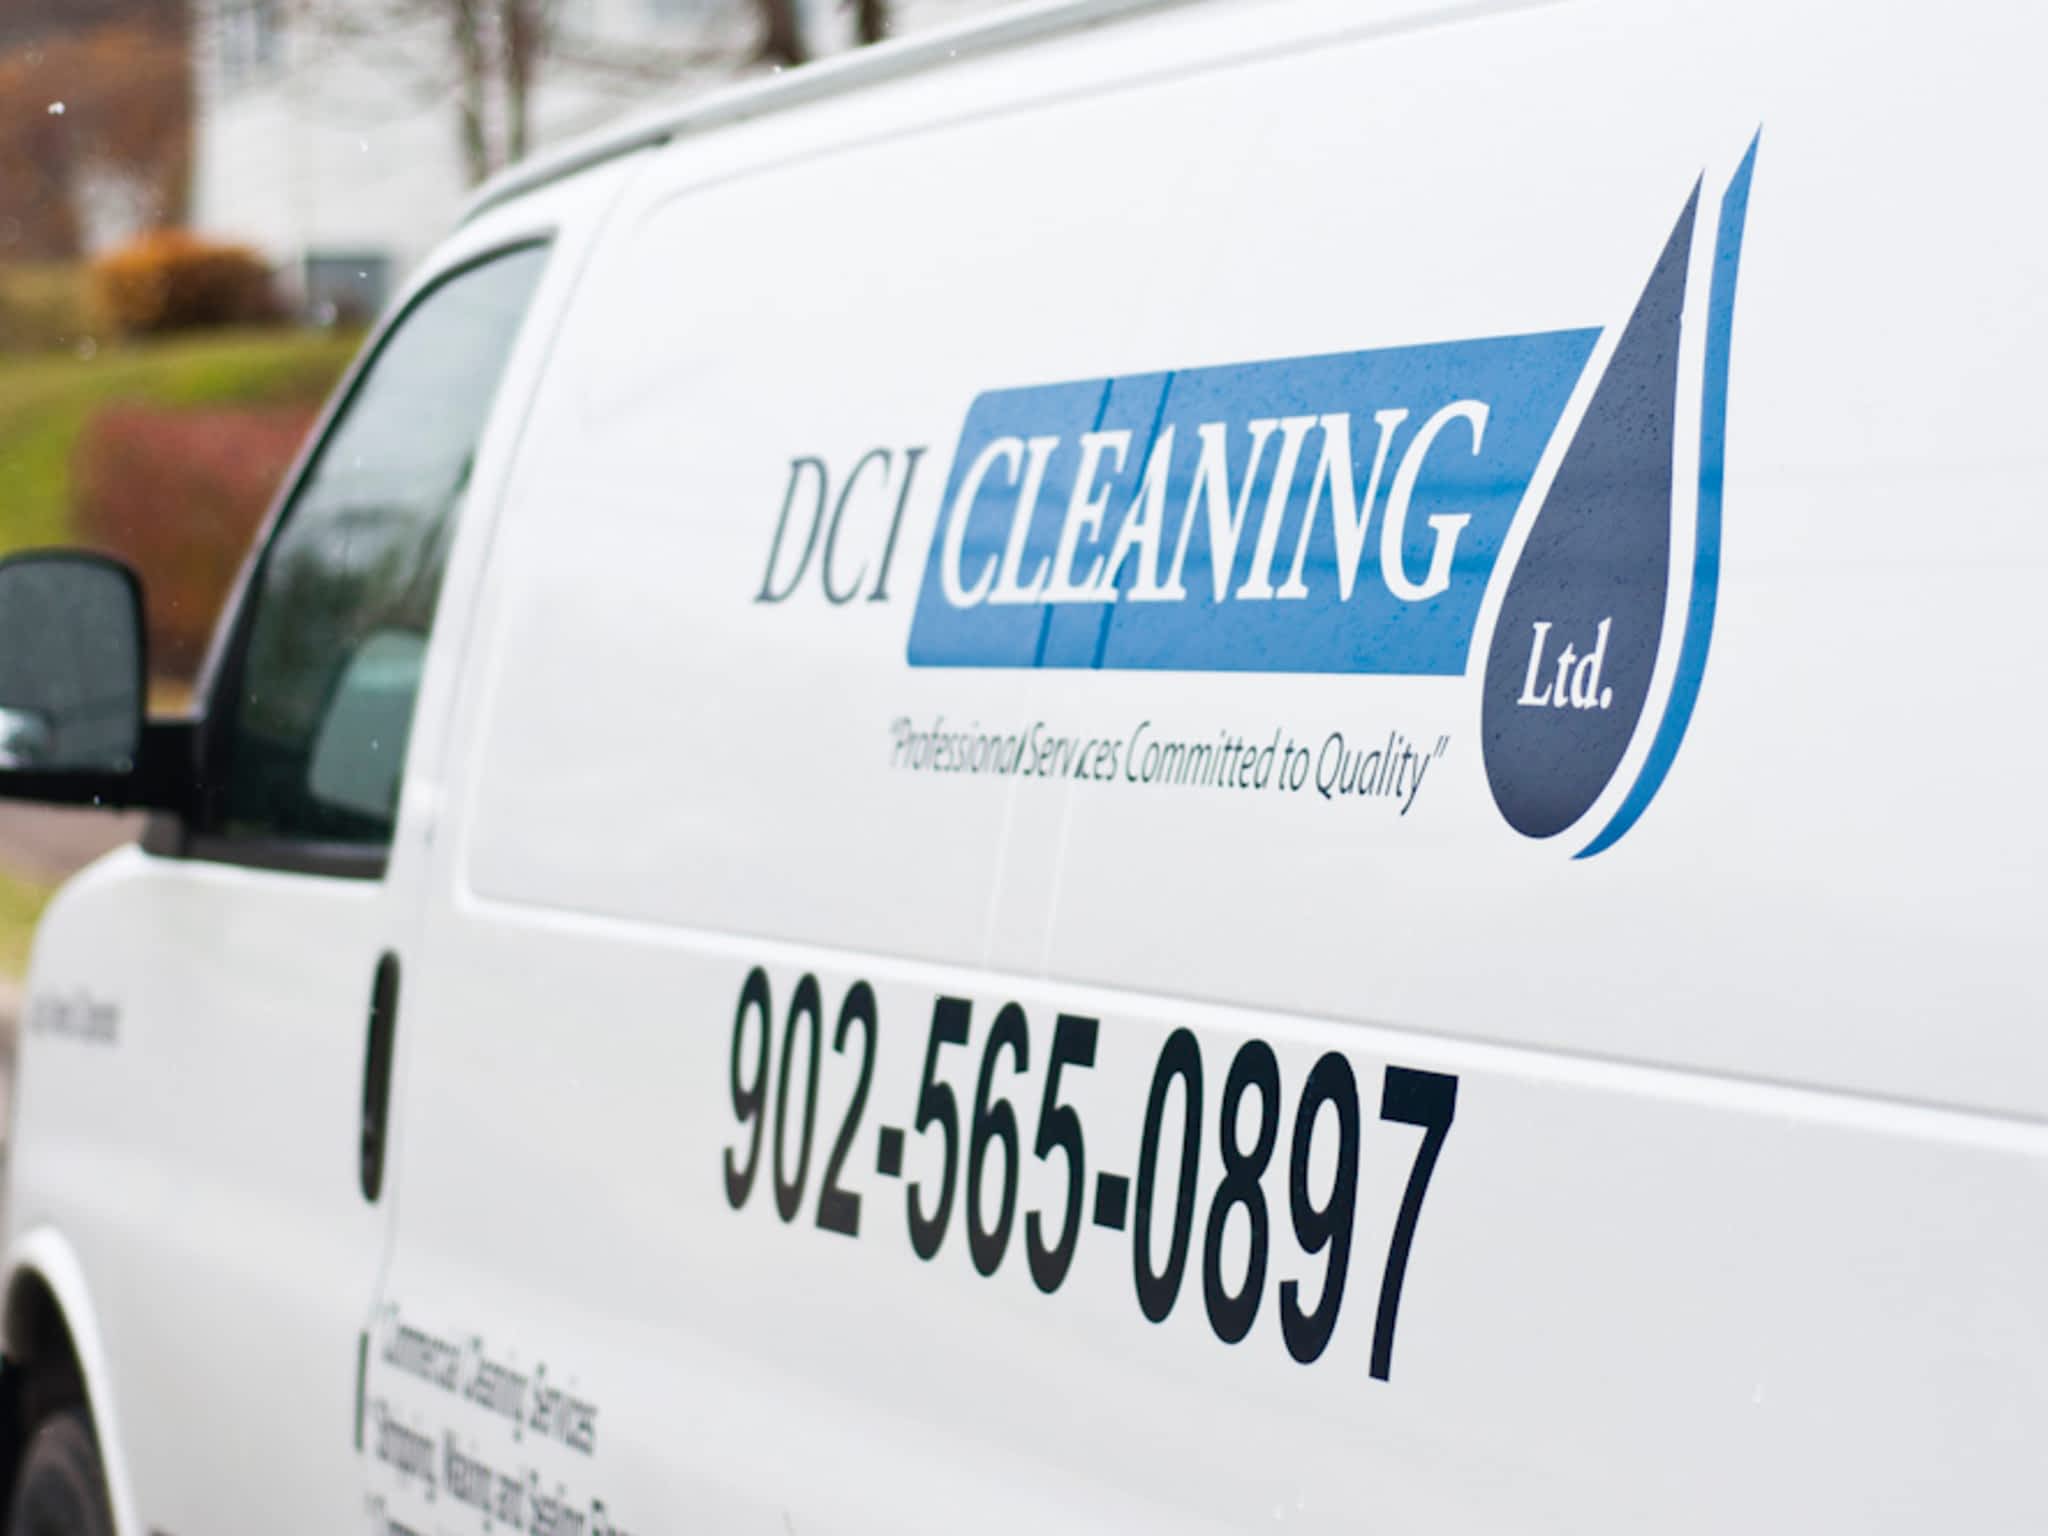 photo DCI Cleaning Ltd